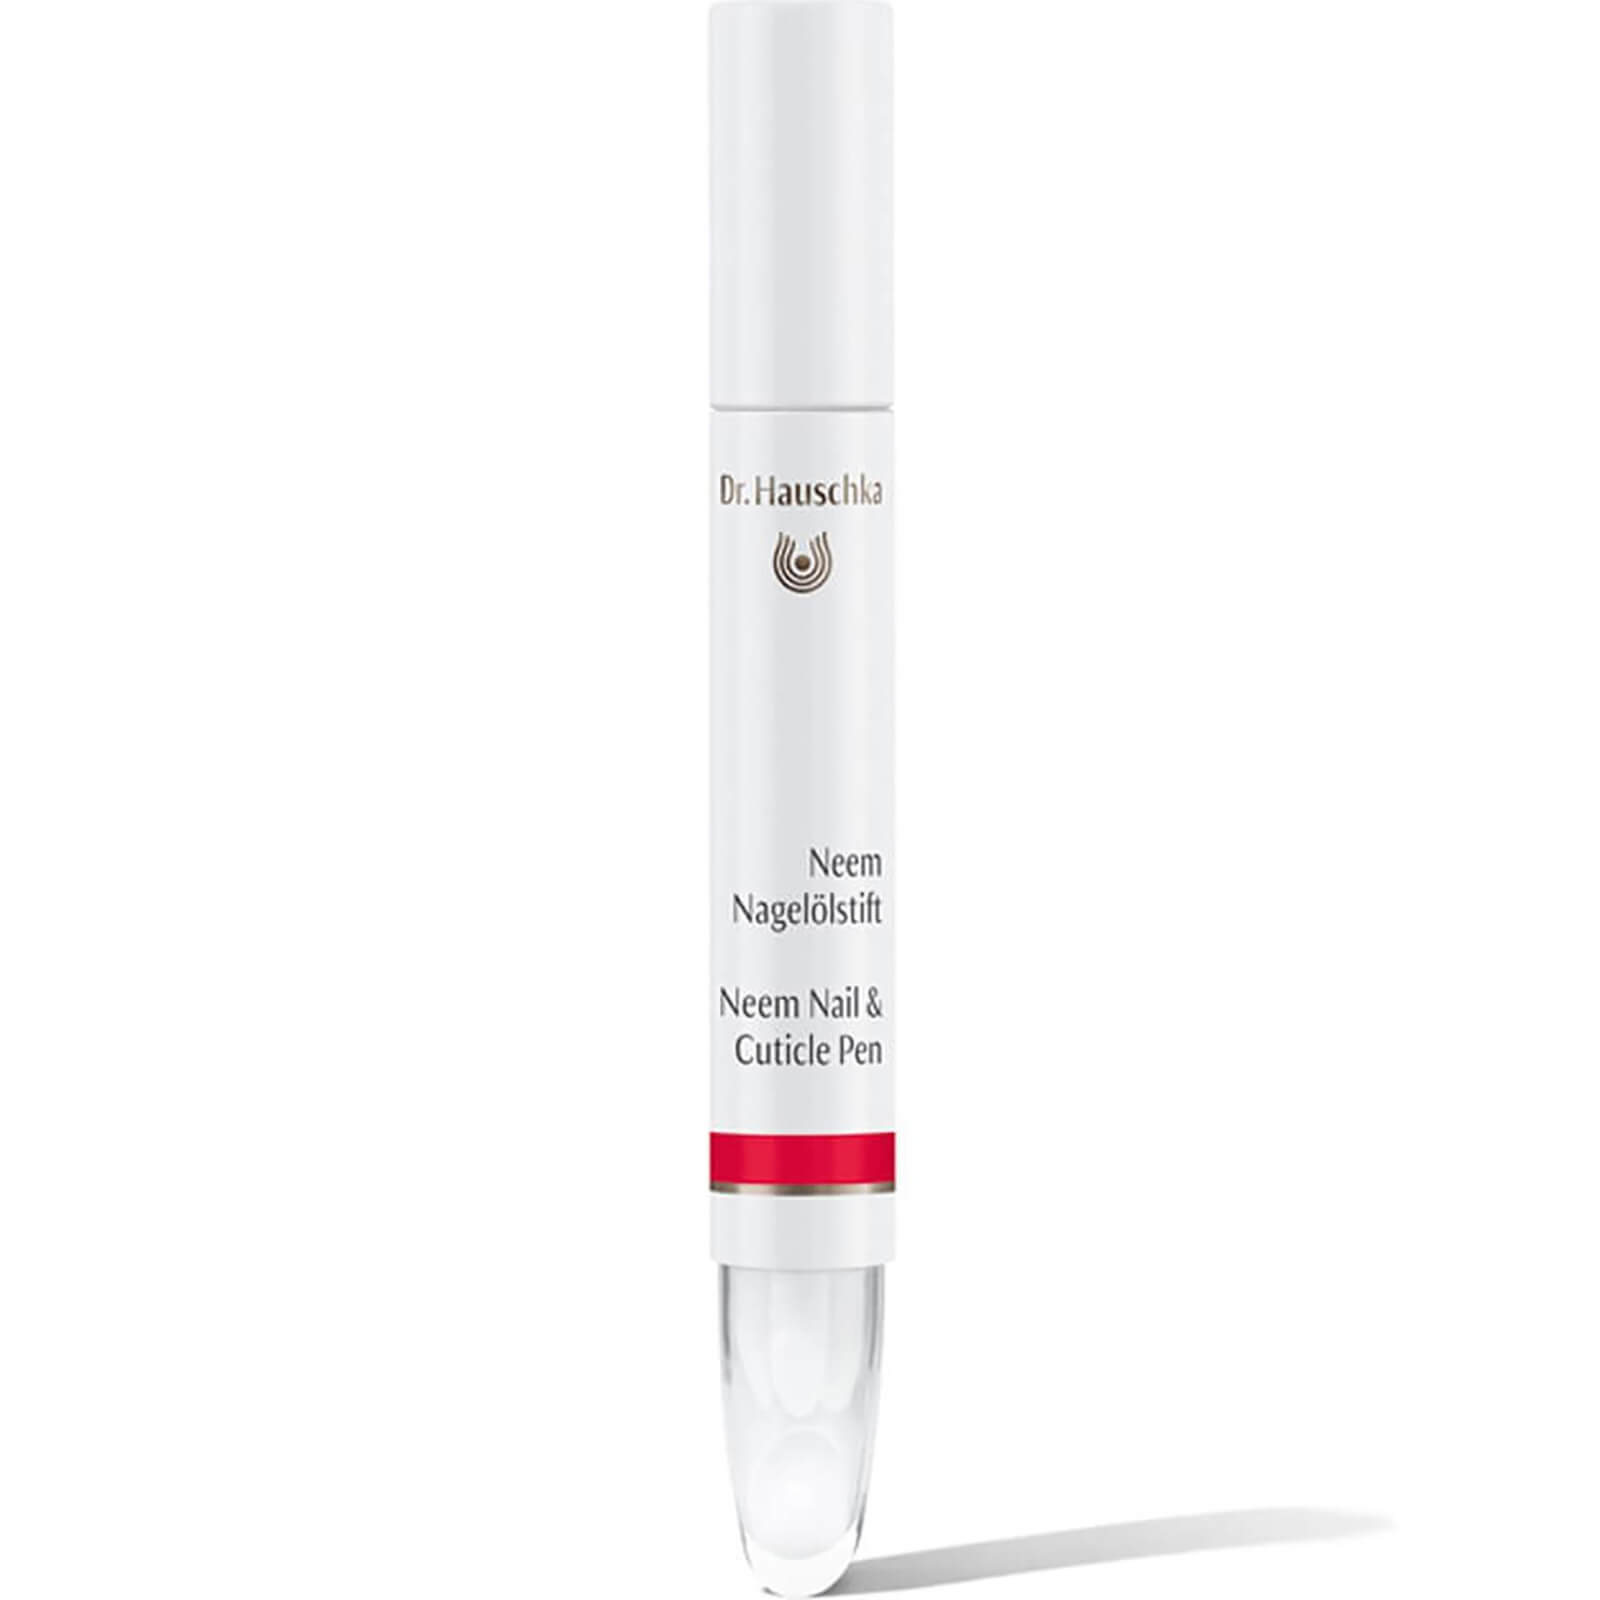 Image of Dr. Hauschka Neem Nail and Cuticle Pen (3ml)